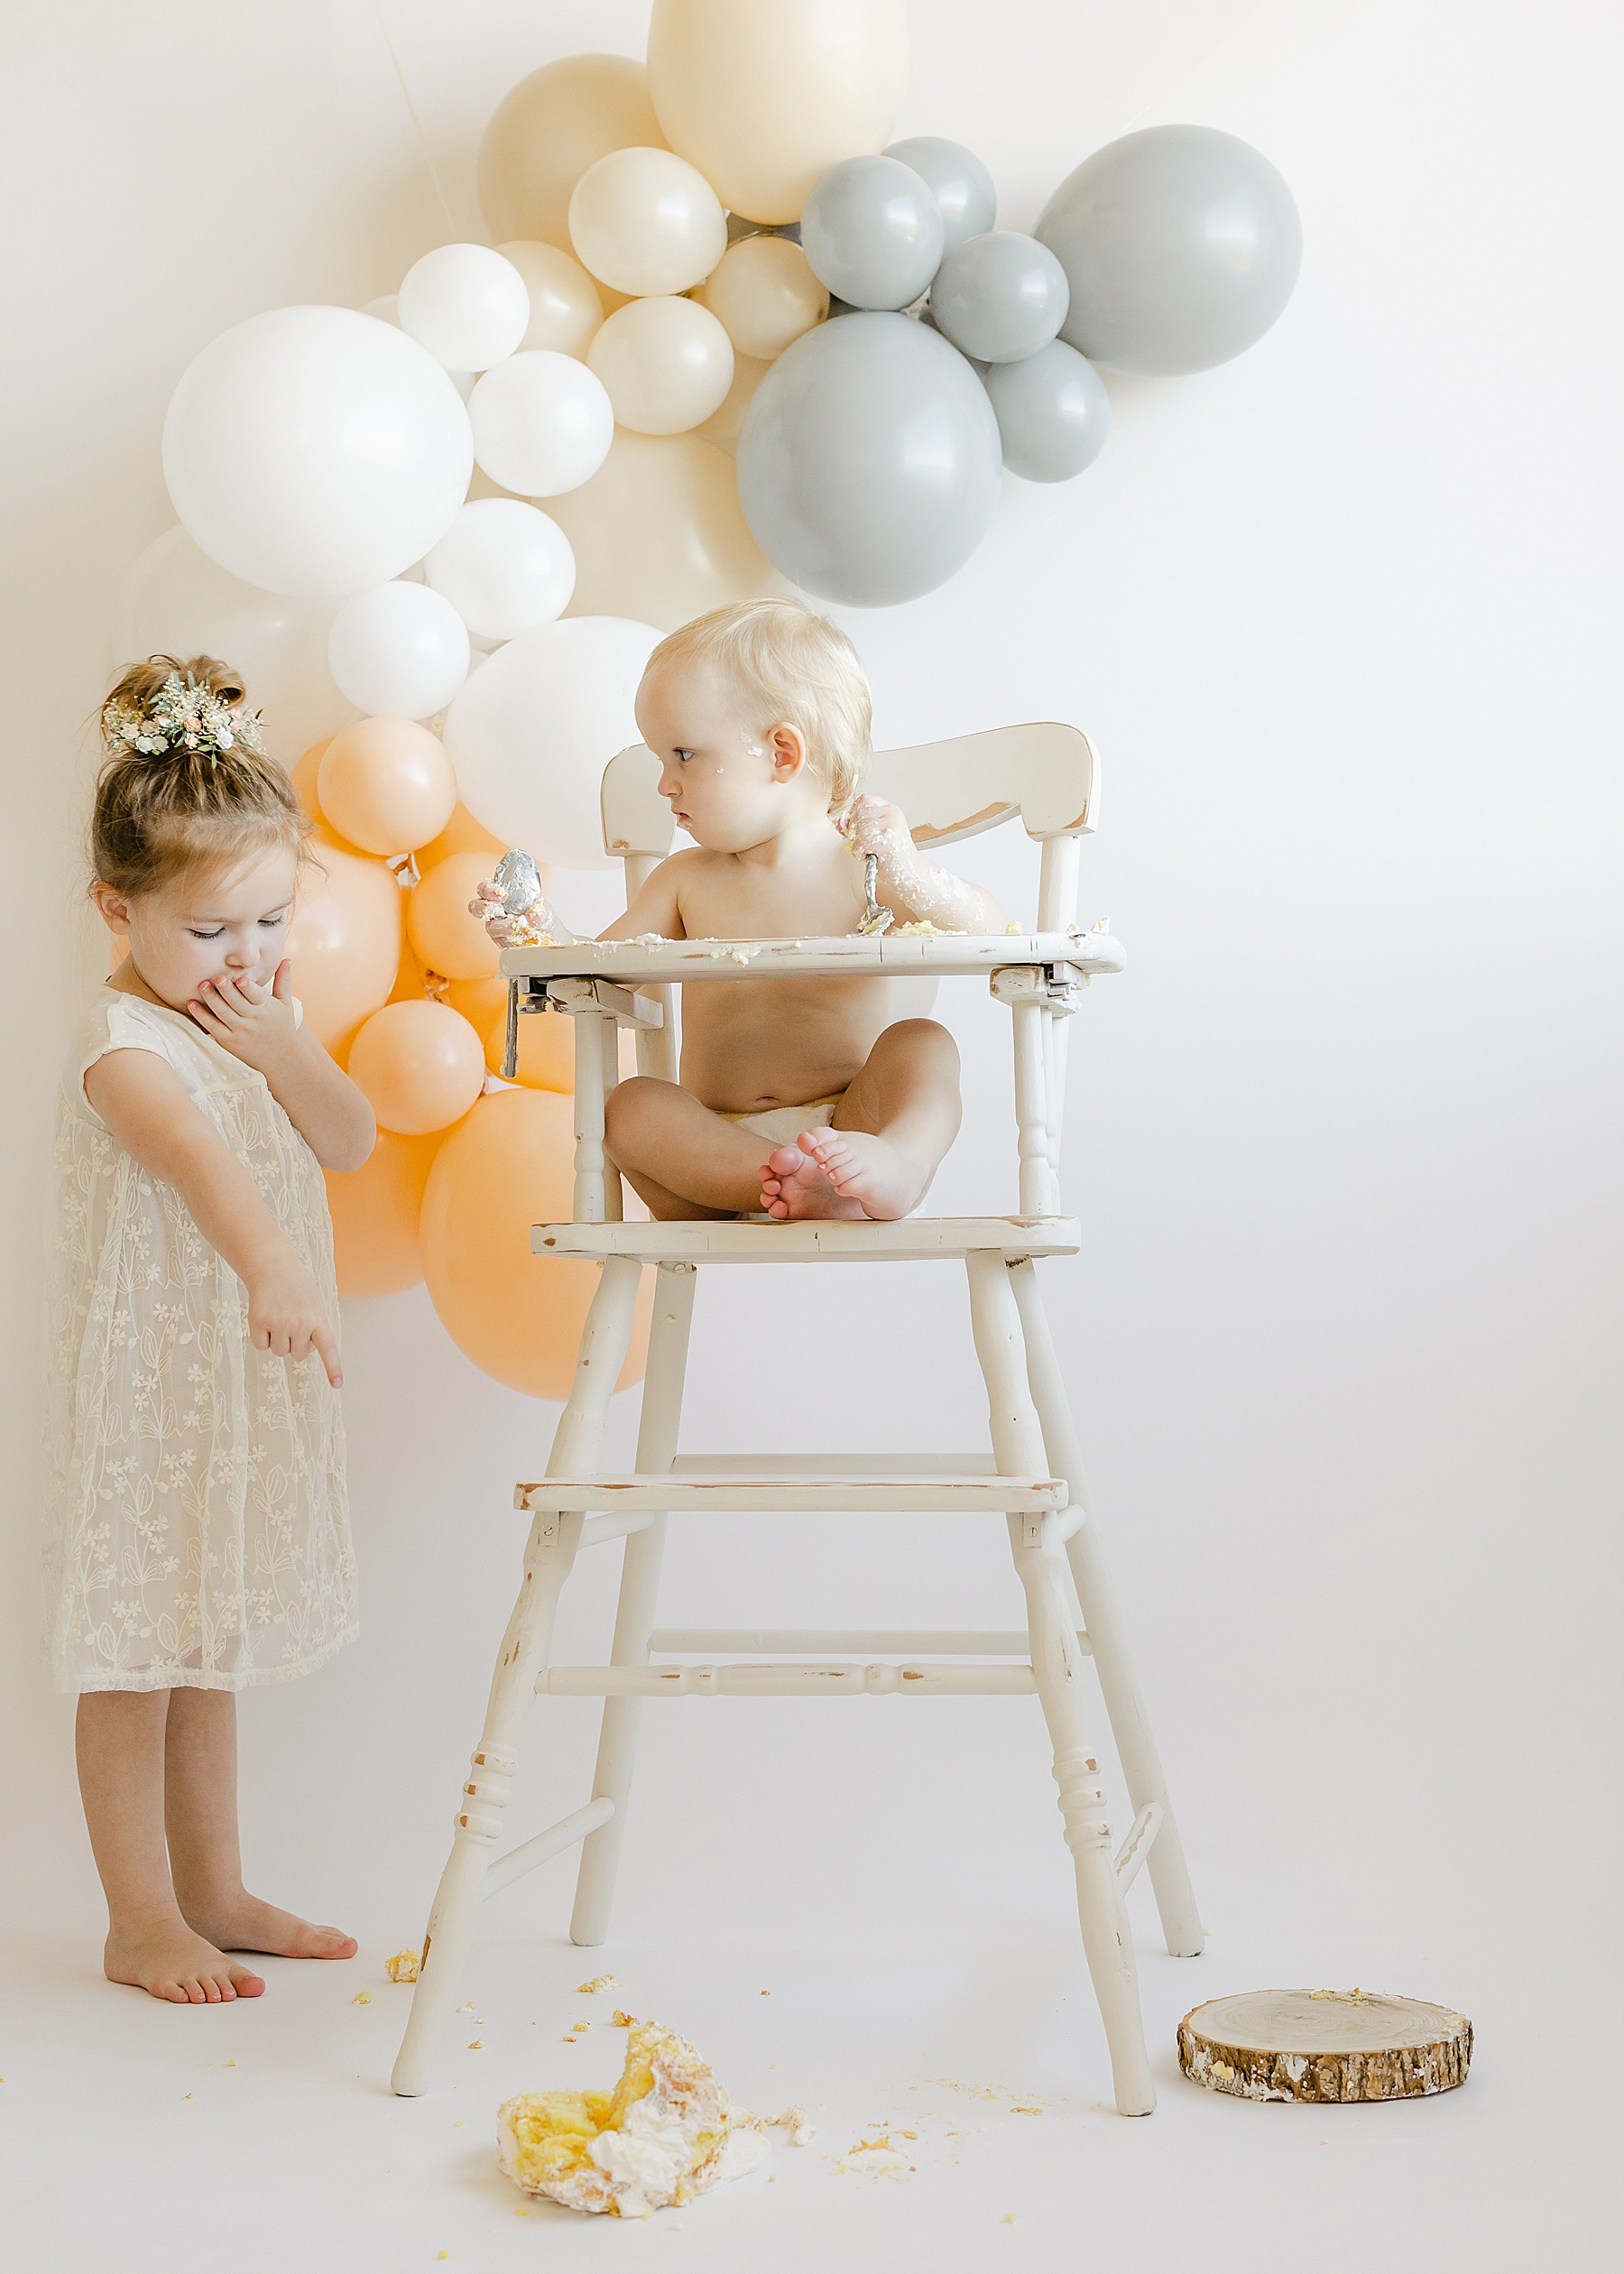 baby boy in white high chair throwing cake on ground with little girl looking and pointing in white dress